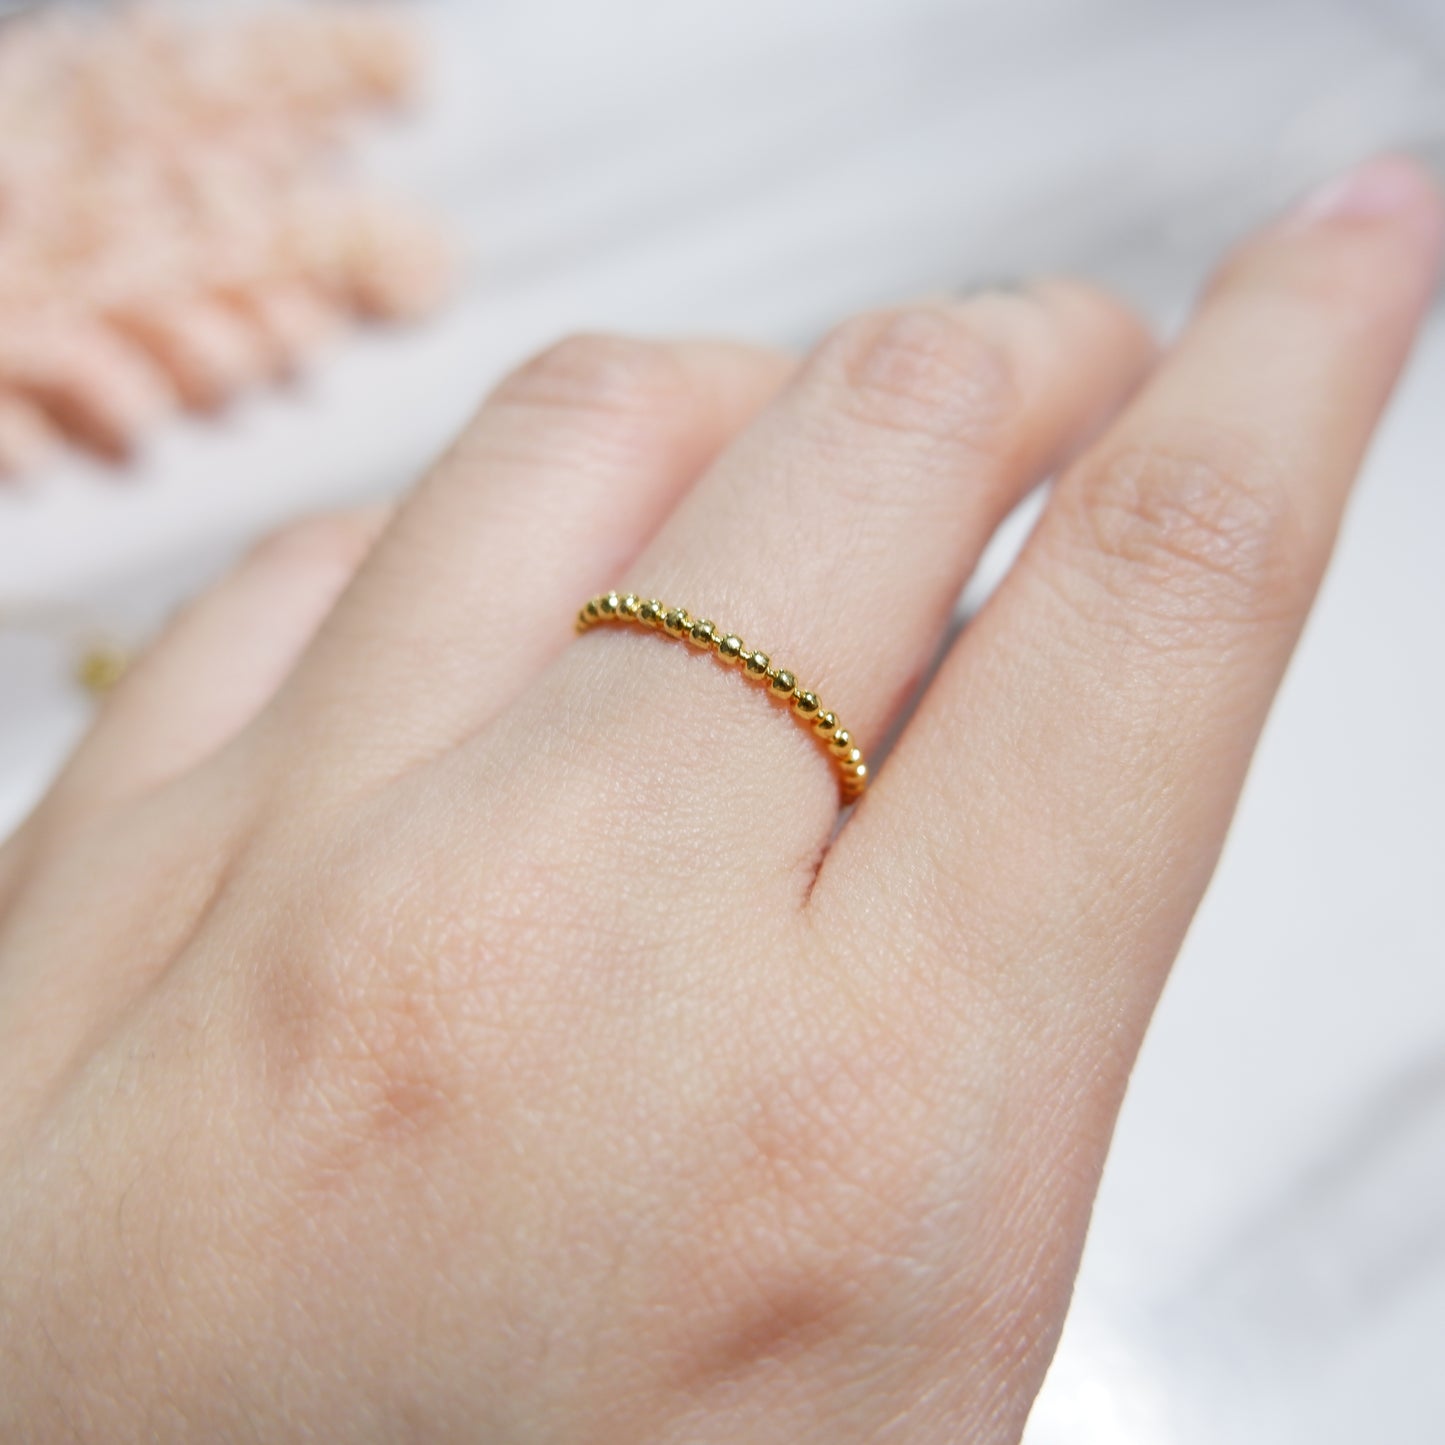 The Beaded Ring in Solid Gold